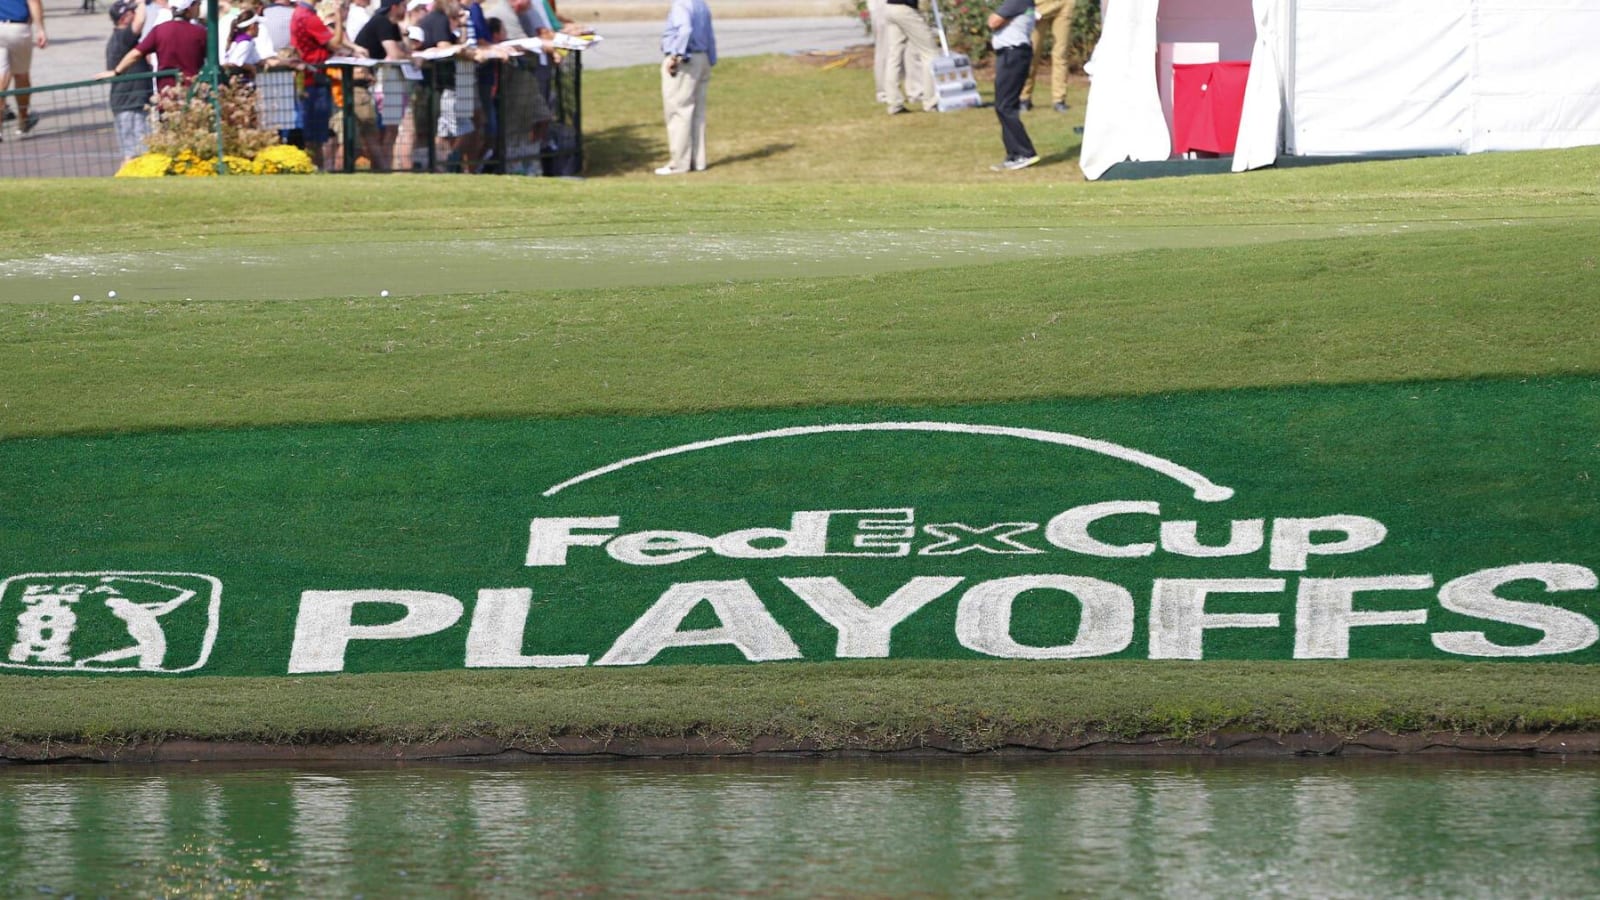 Will LIV Golfers who sued PGA get to play FedEx Cup Playoffs?